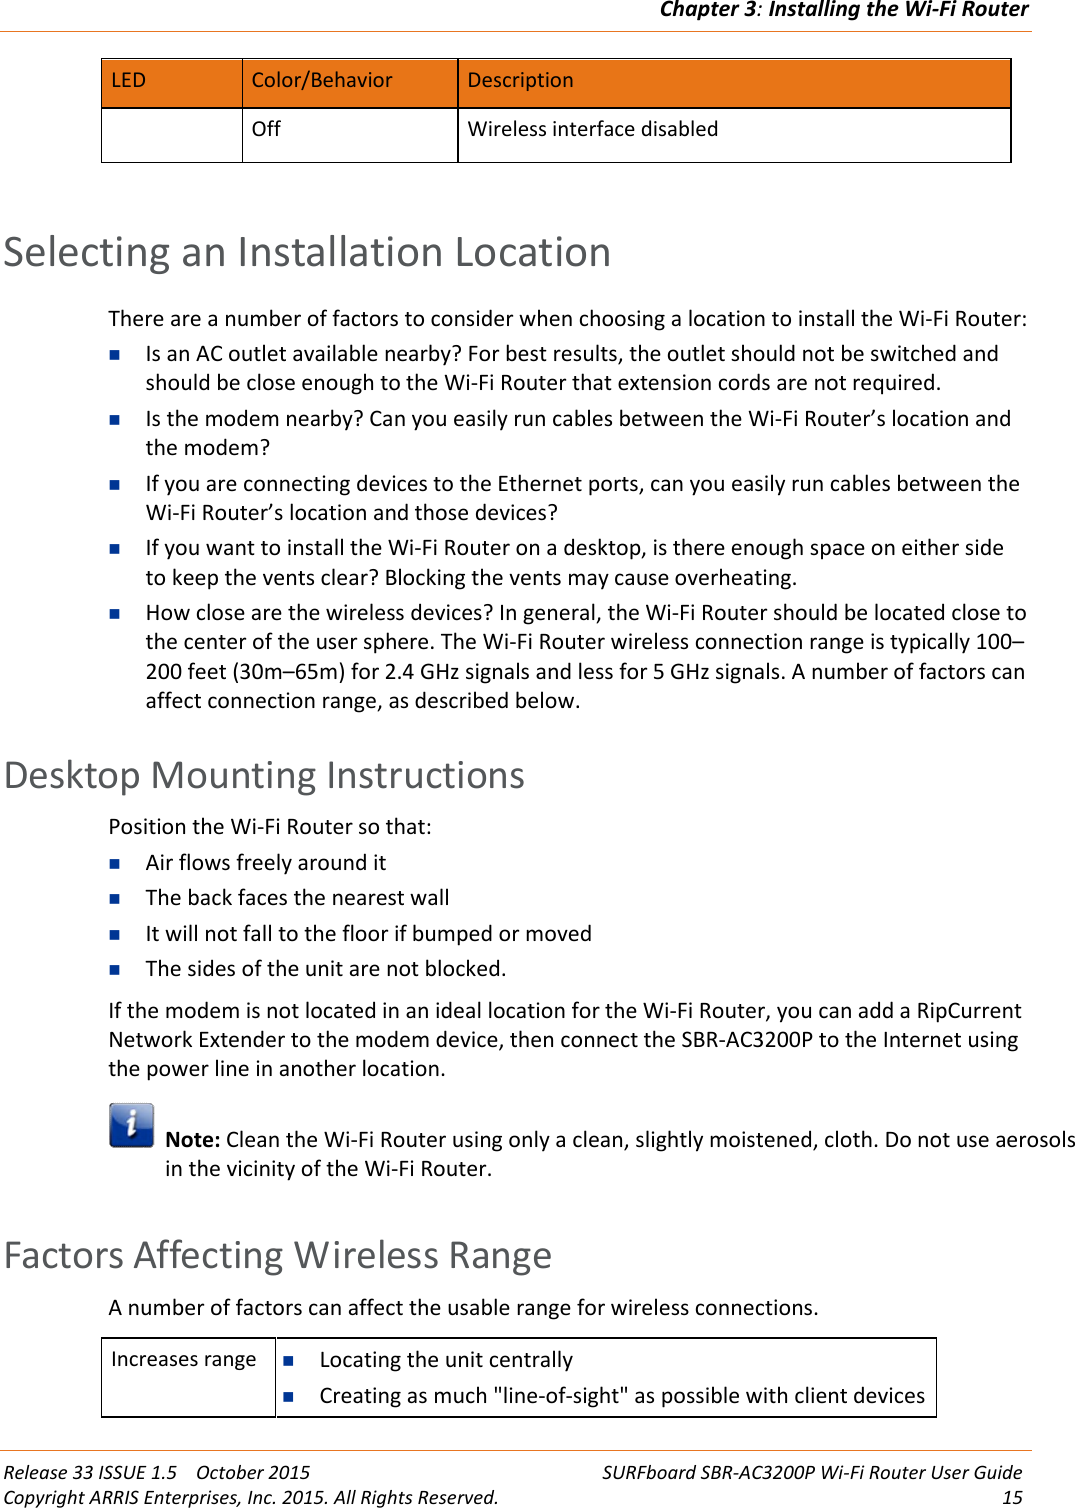 Chapter 3:Installing the Wi-Fi RouterRelease 33 ISSUE 1.5 October 2015 SURFboard SBR-AC3200P Wi-Fi Router User GuideCopyright ARRIS Enterprises, Inc. 2015. All Rights Reserved. 15LED Color/Behavior DescriptionOff Wireless interface disabledSelecting an Installation LocationThere are a number of factors to consider when choosing a location to install the Wi-Fi Router:Is an AC outlet available nearby? For best results, the outlet should not be switched andshould be close enough to the Wi-Fi Router that extension cords are not required.Is the modem nearby? Can you easily run cables between the Wi-Fi Router’s location andthe modem?If you are connecting devices to the Ethernet ports, can you easily run cables between theWi-Fi Router’s location and those devices?If you want to install the Wi-Fi Router on a desktop, is there enough space on either sideto keep the vents clear? Blocking the vents may cause overheating.How close are the wireless devices? In general, the Wi-Fi Router should be located close tothe center of the user sphere. The Wi-Fi Router wireless connection range is typically 100–200 feet (30m–65m) for 2.4 GHz signals and less for 5 GHz signals. A number of factors canaffect connection range, as described below.Desktop Mounting InstructionsPosition the Wi-Fi Router so that:Air flows freely around itThe back faces the nearest wallIt will not fall to the floor if bumped or movedThe sides of the unit are not blocked.If the modem is not located in an ideal location for the Wi-Fi Router, you can add a RipCurrentNetwork Extender to the modem device, then connect the SBR-AC3200P to the Internet usingthe power line in another location.Note: Clean the Wi-Fi Router using only a clean, slightly moistened, cloth. Do not use aerosolsin the vicinity of the Wi-Fi Router.Factors Affecting Wireless RangeA number of factors can affect the usable range for wireless connections.Increases range Locating the unit centrallyCreating as much &quot;line-of-sight&quot; as possible with client devices